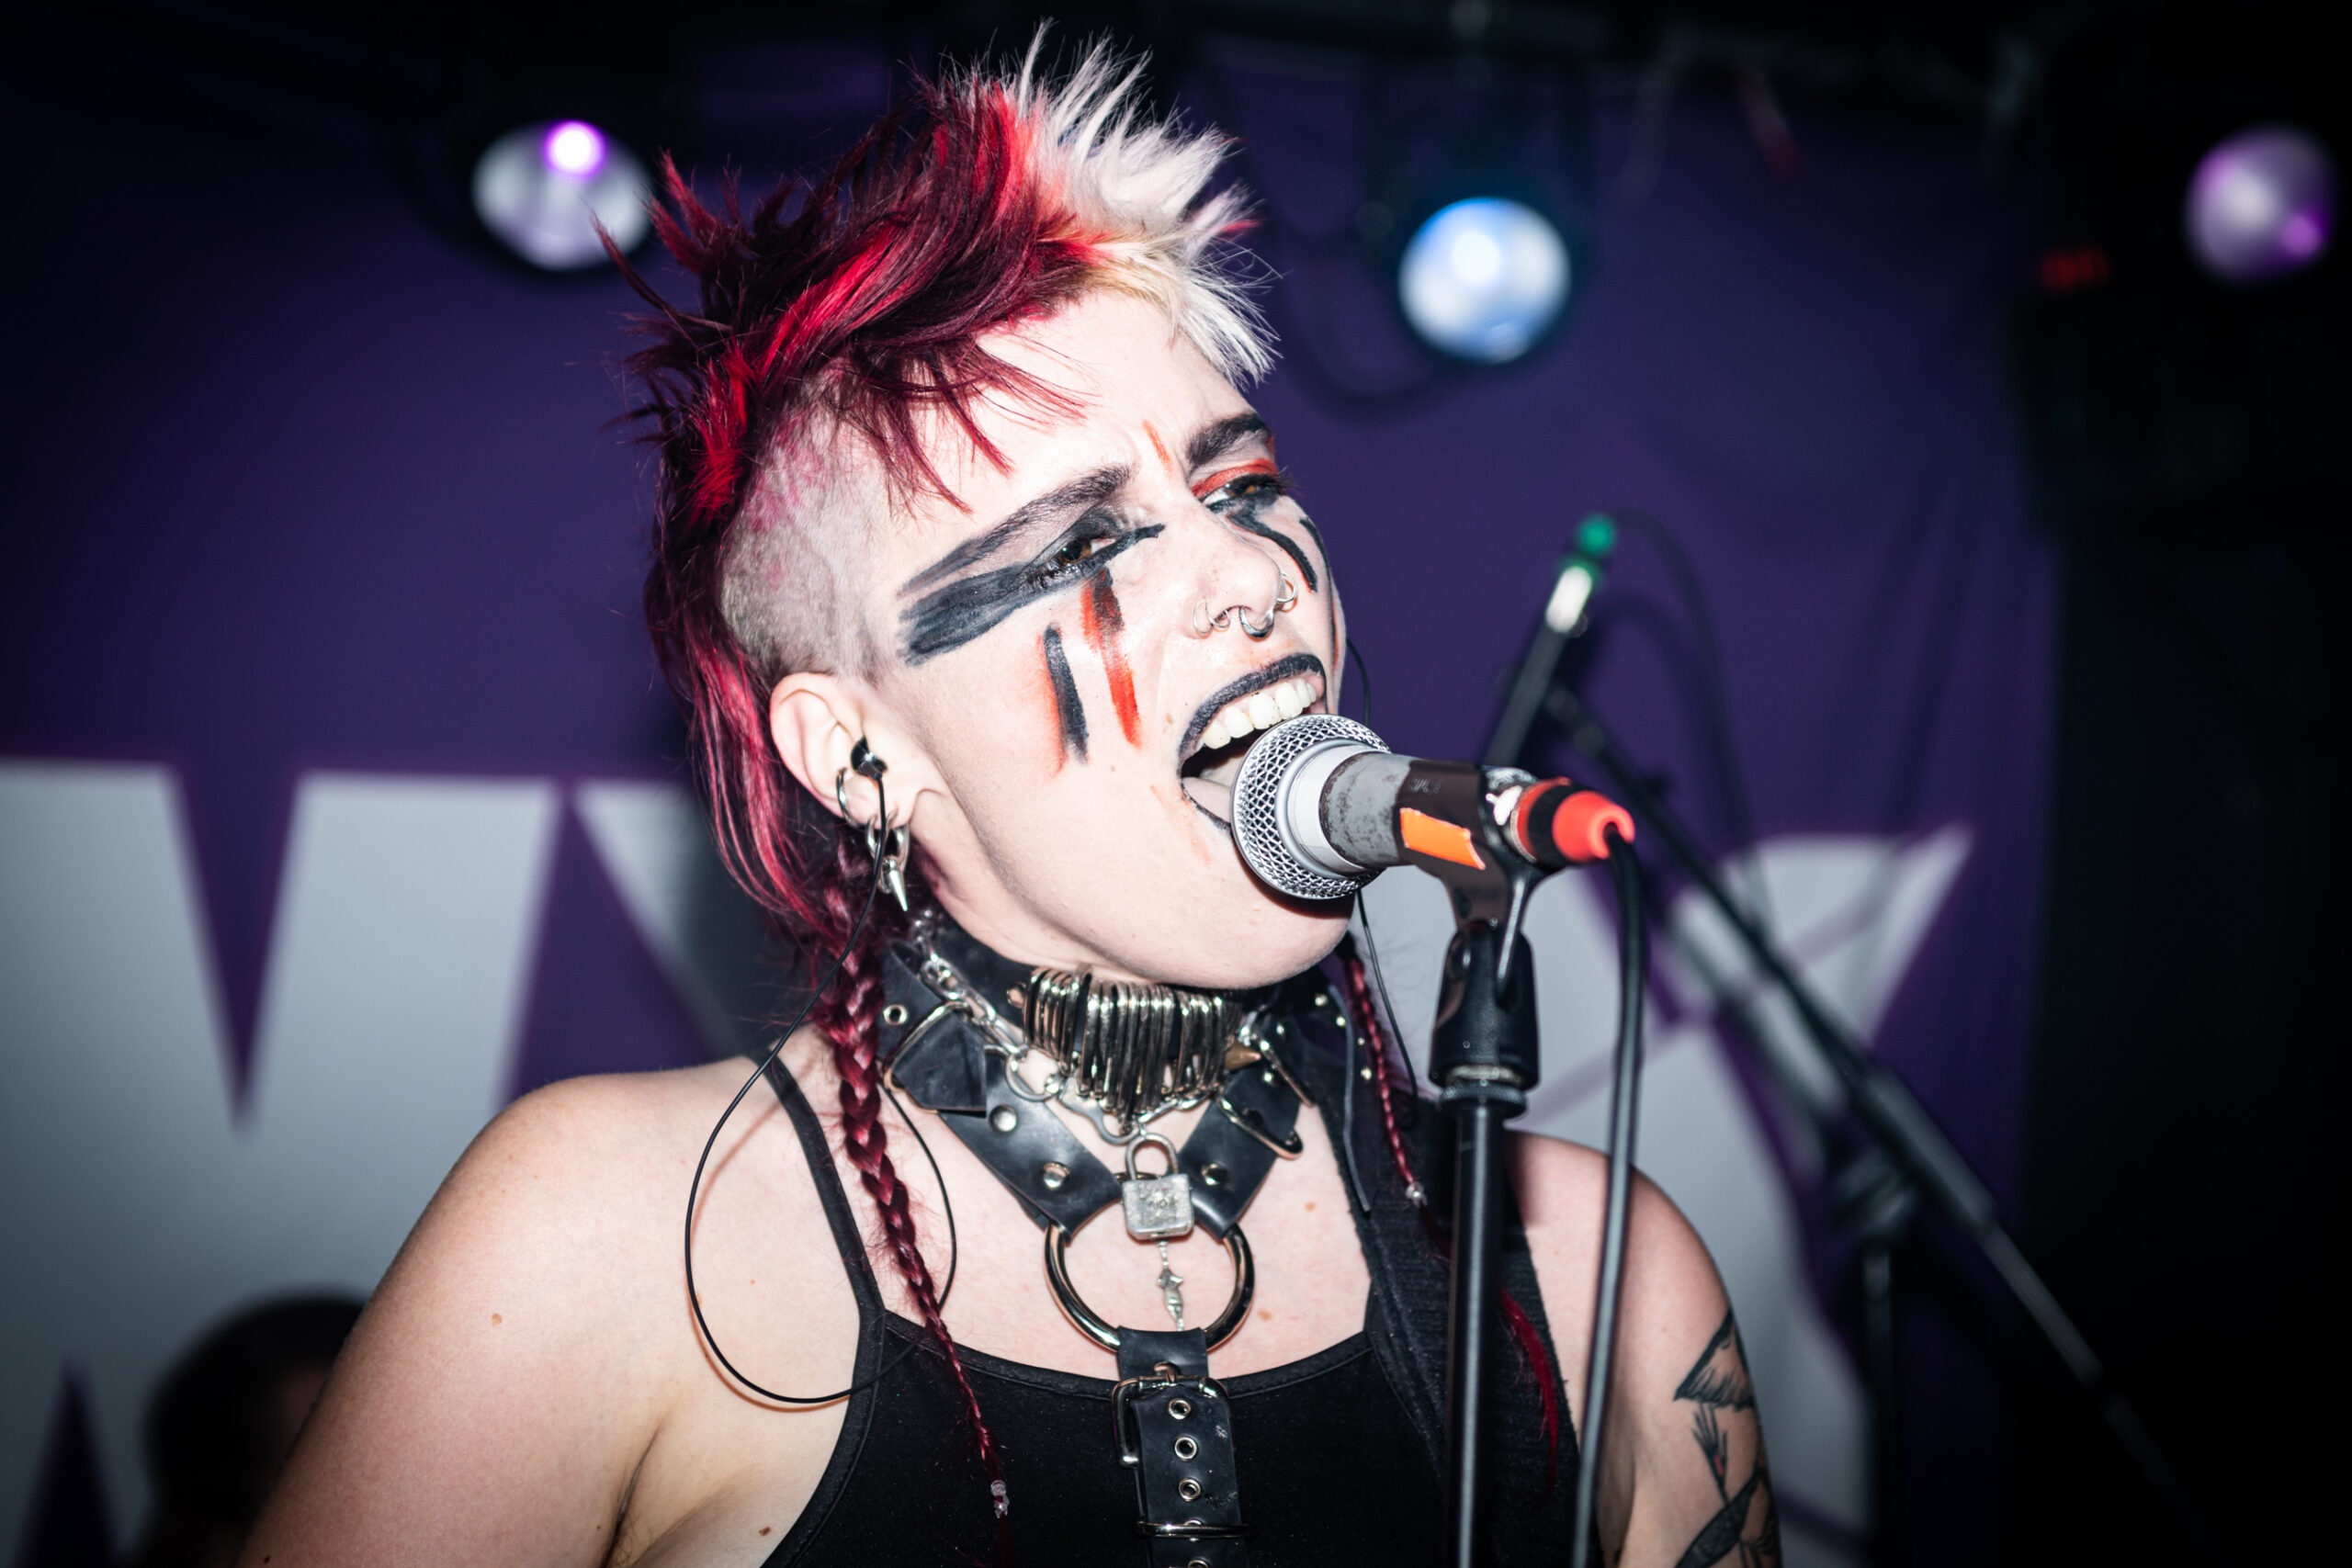 Hawxx – ‘Soulbreaking Machines’ Single Launch Event – The Black Heart, London